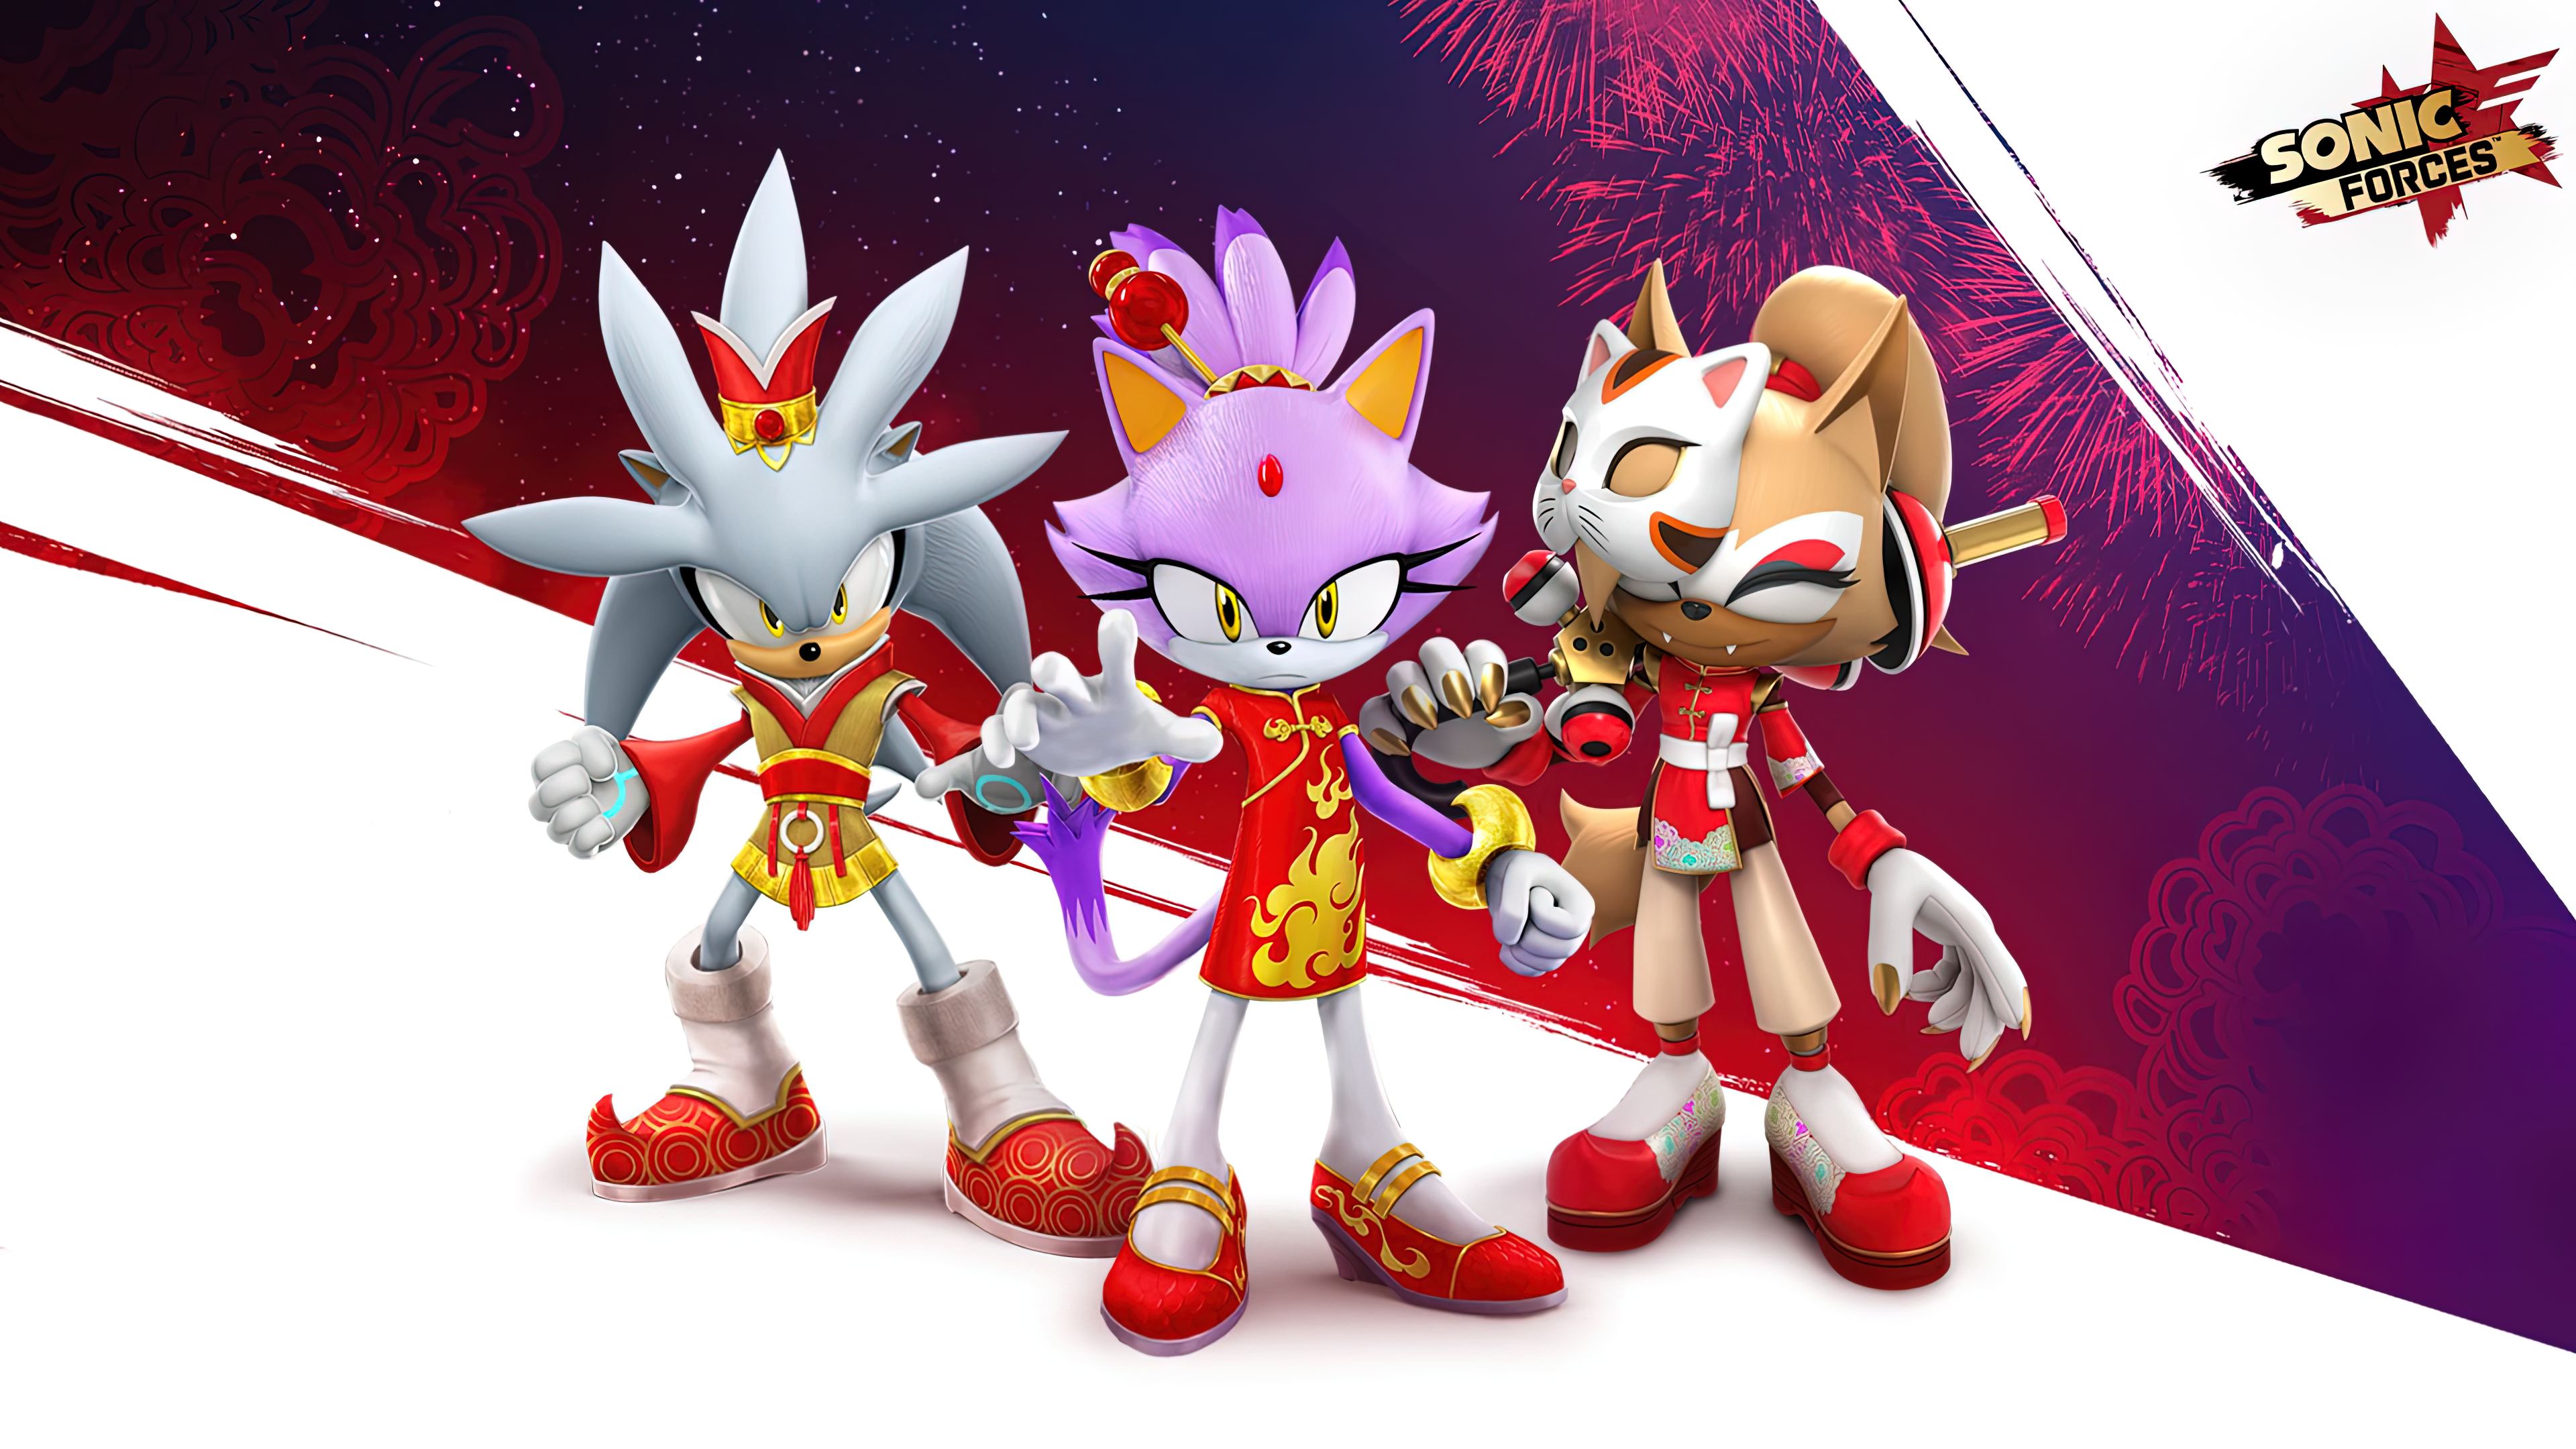 Sonic Sonic The Hedgehog Chinese Dress Chinese Clothing Chinese Knot Sega Spring Festival New Year M 3840x2160